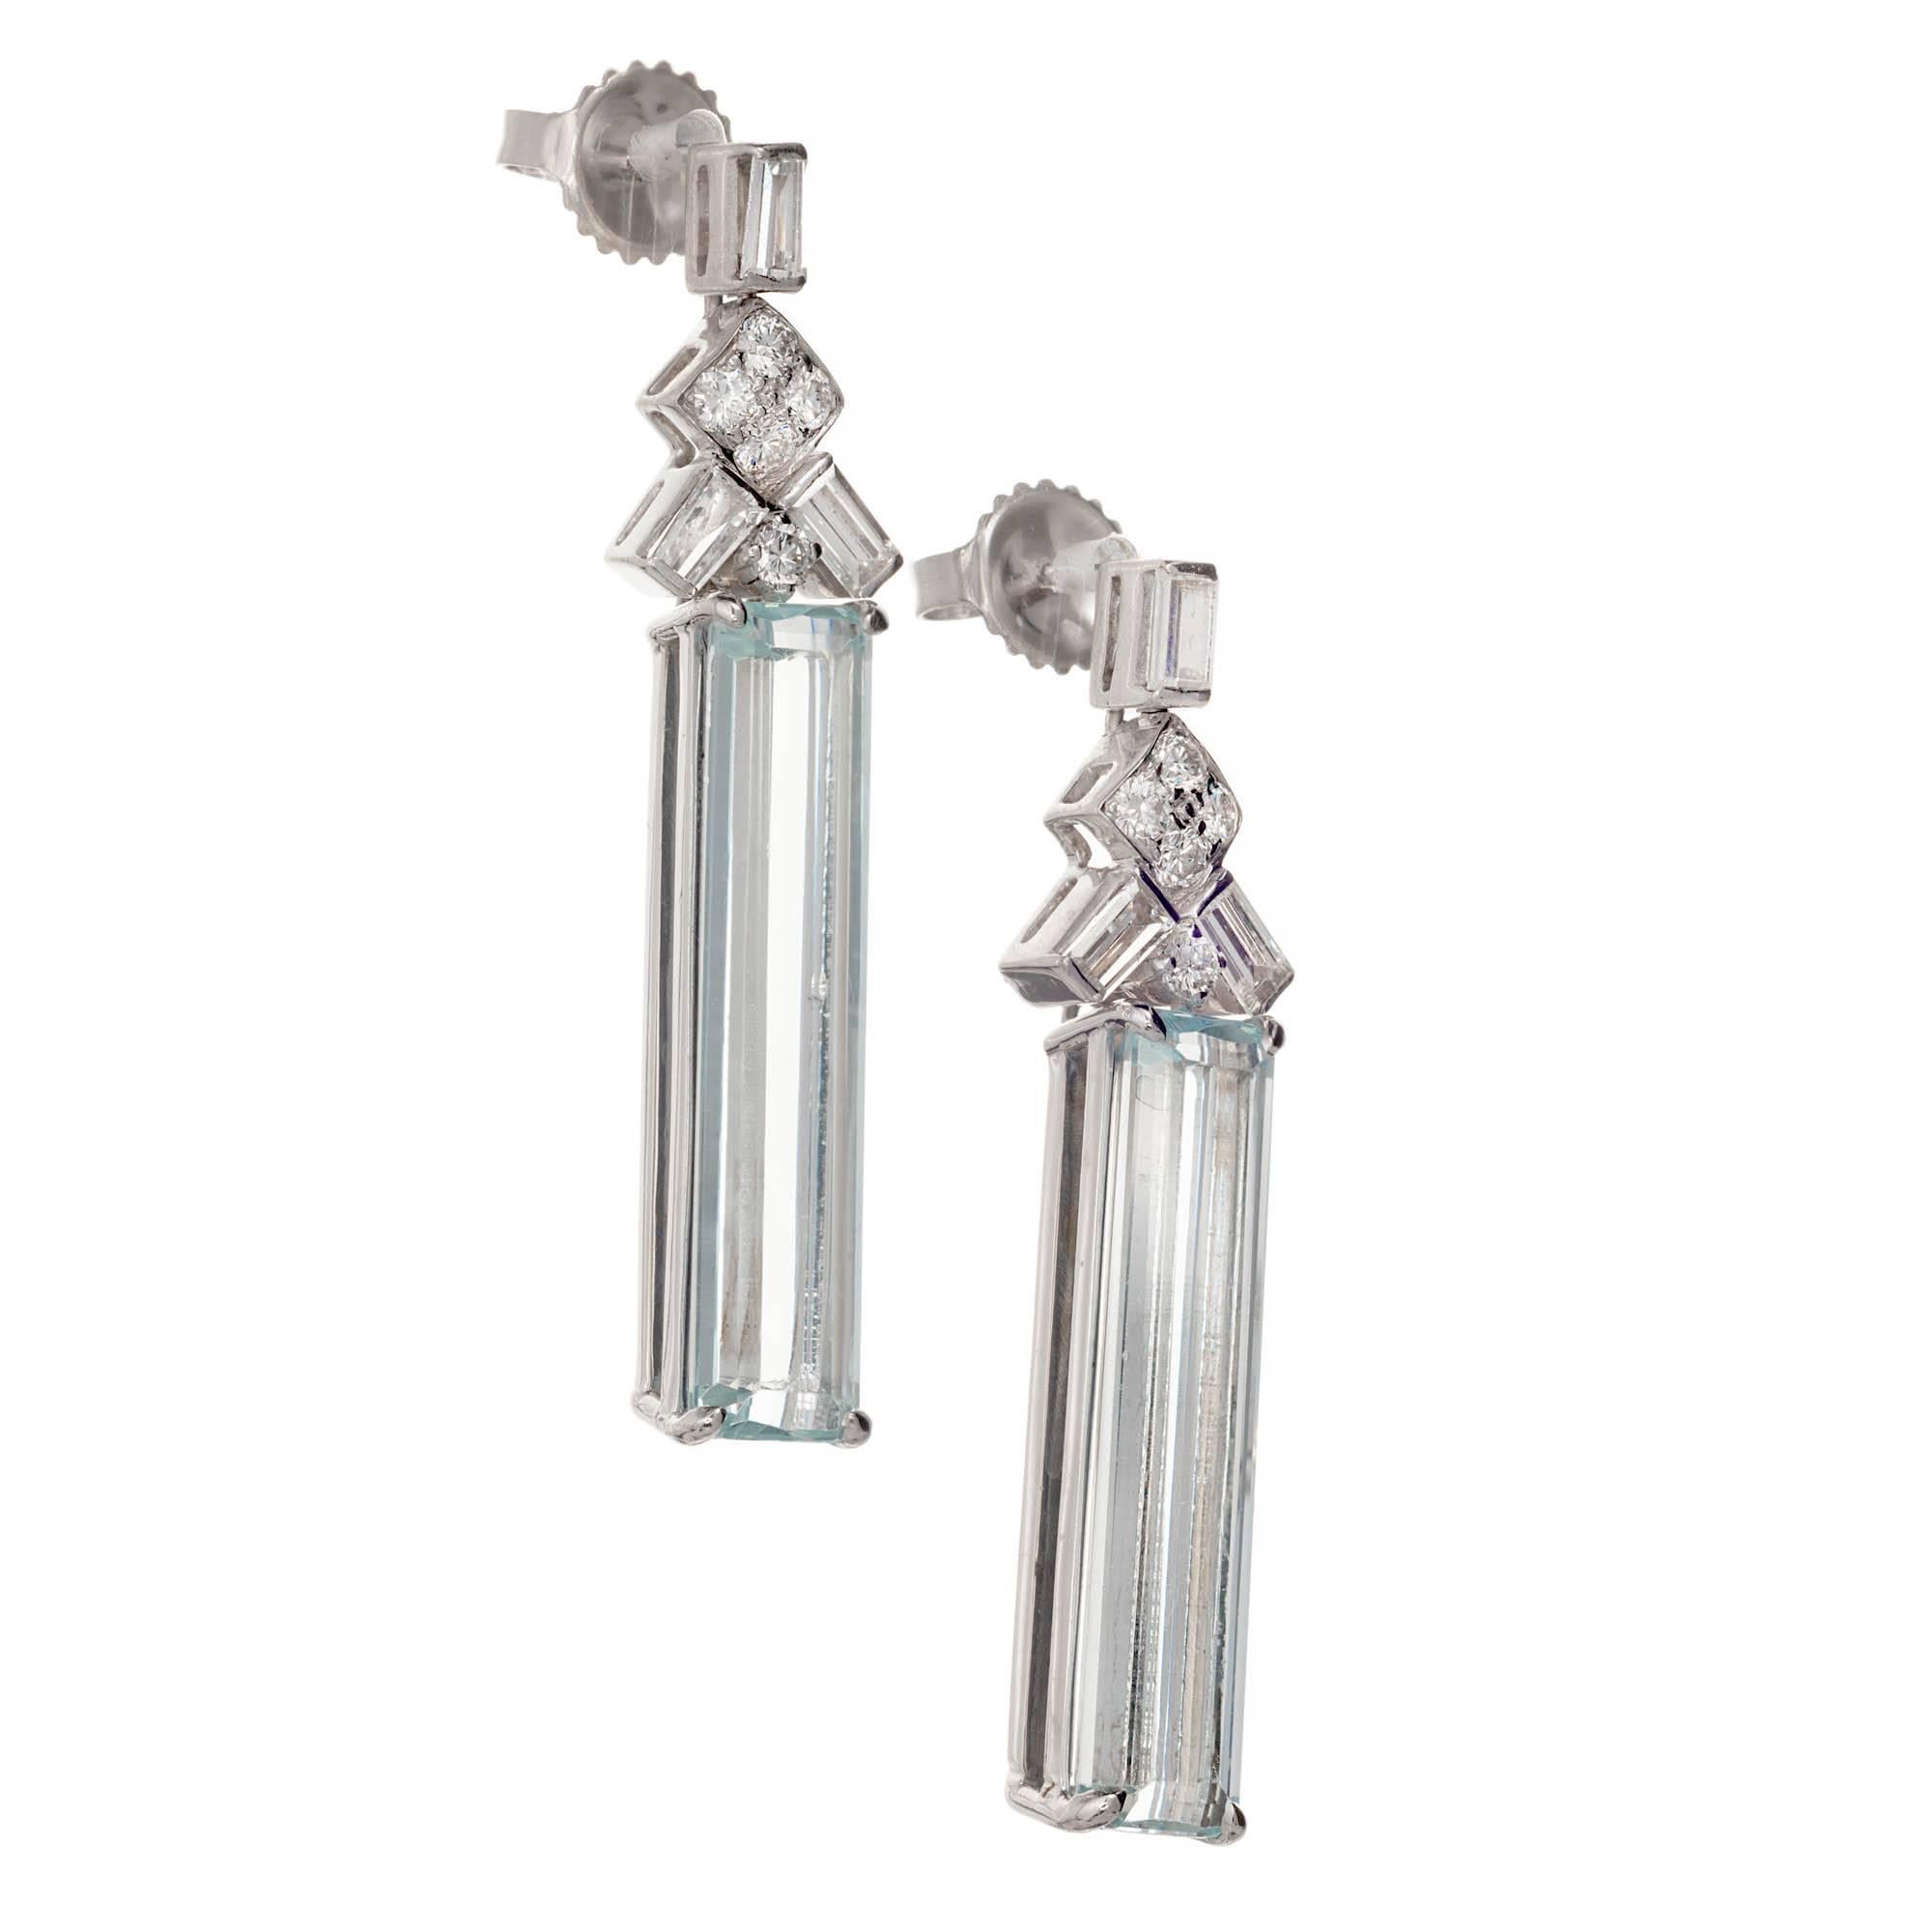 Peter Suchy natural untreated aqua dangle earrings. The diamonds and aqua are from a 1940’s estate.  The earrings are made in an Art Deco style in the Peter Suchy workshop. The posts are 18k white gold. The backs and earrings are 14k white gold.

6